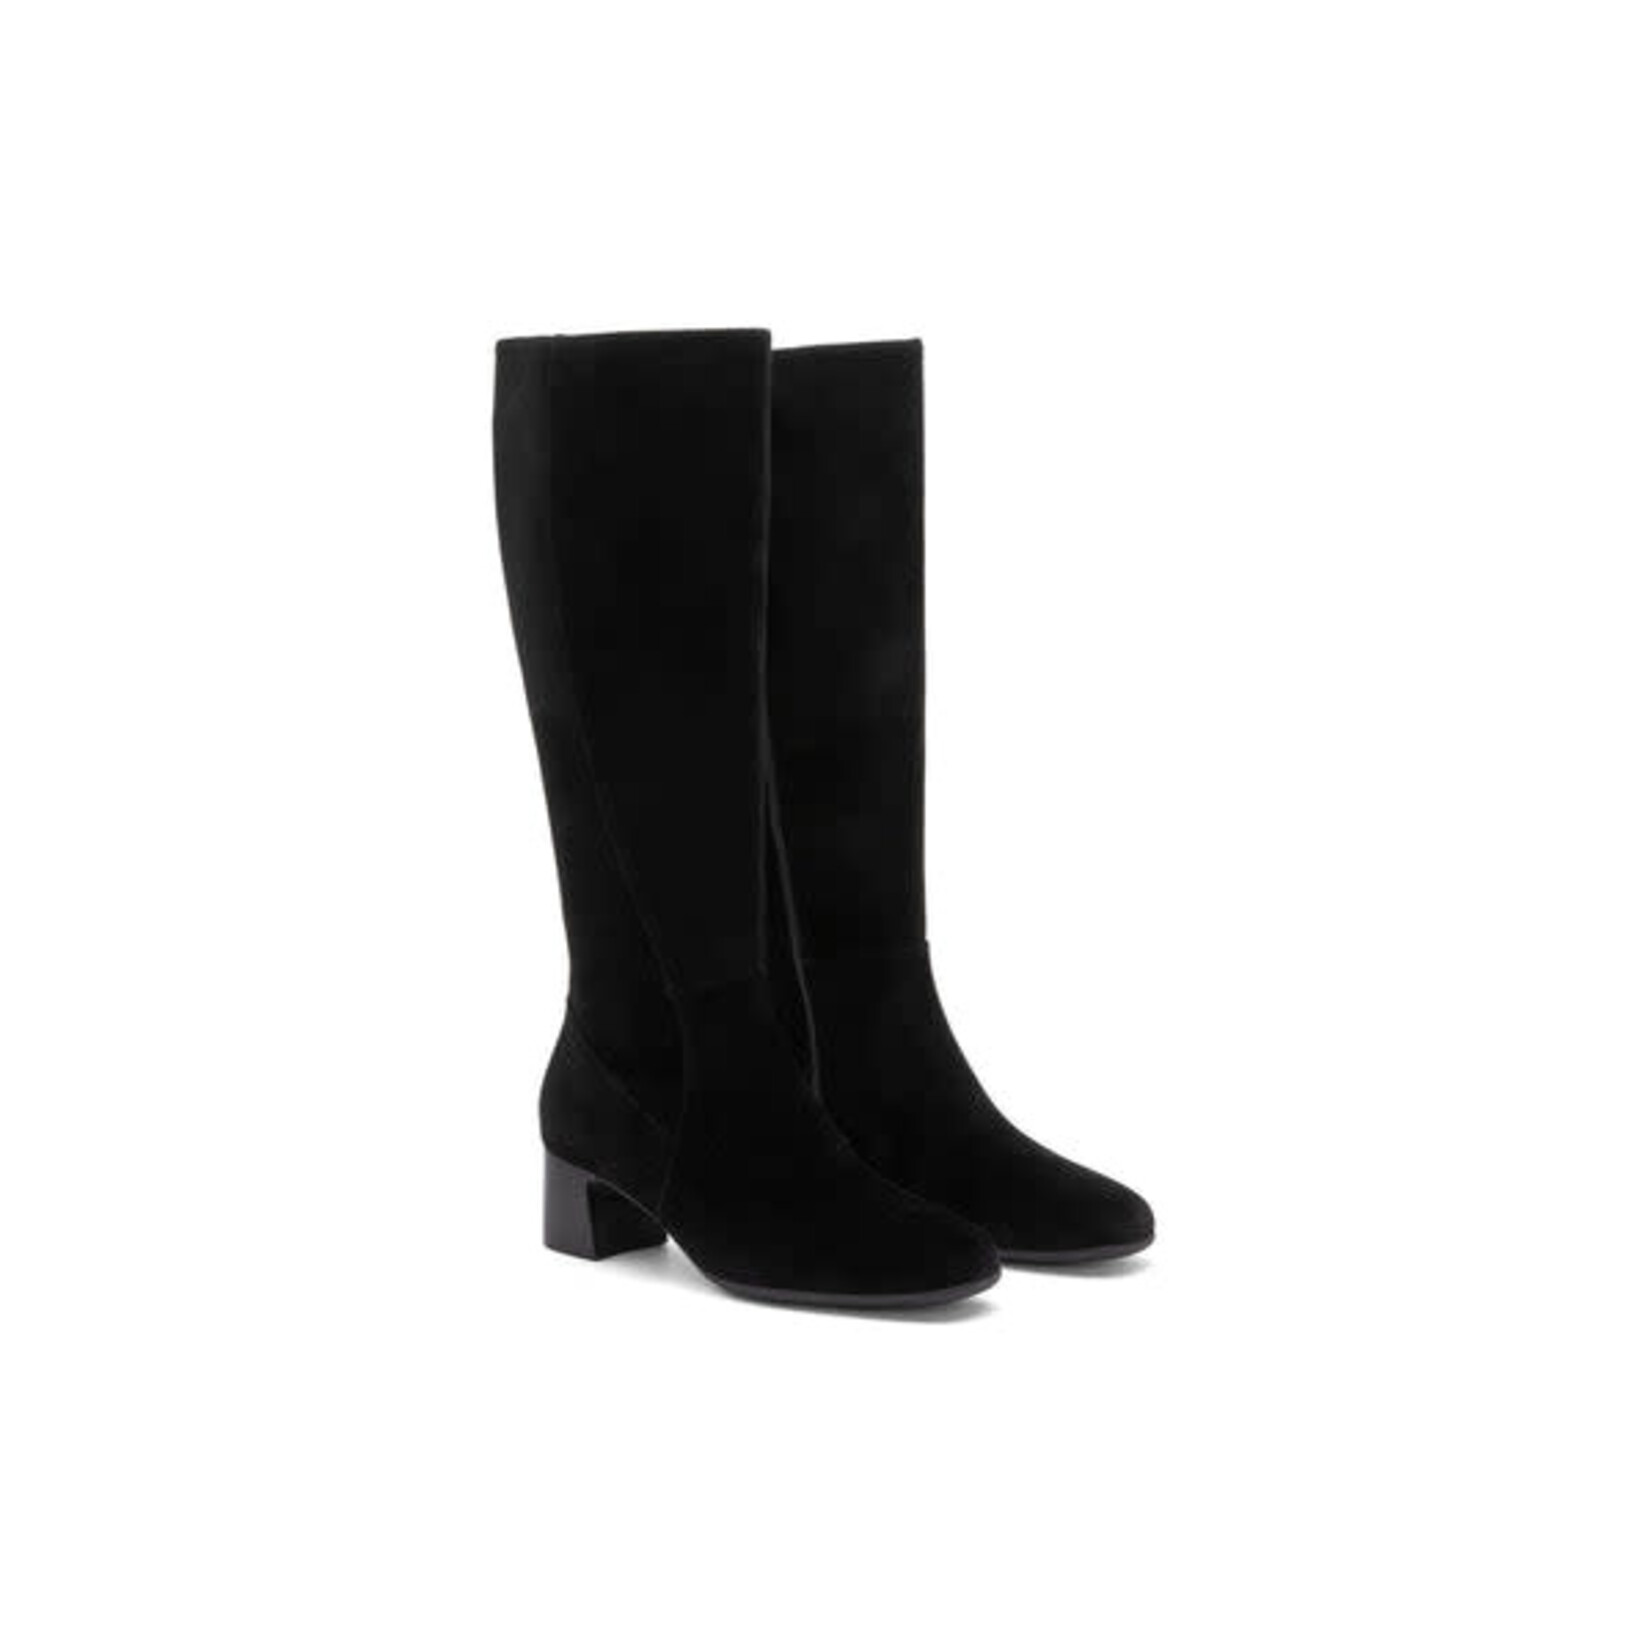 ABEO Avenue Tall Black Suede Boots 2" Heel by ABEO